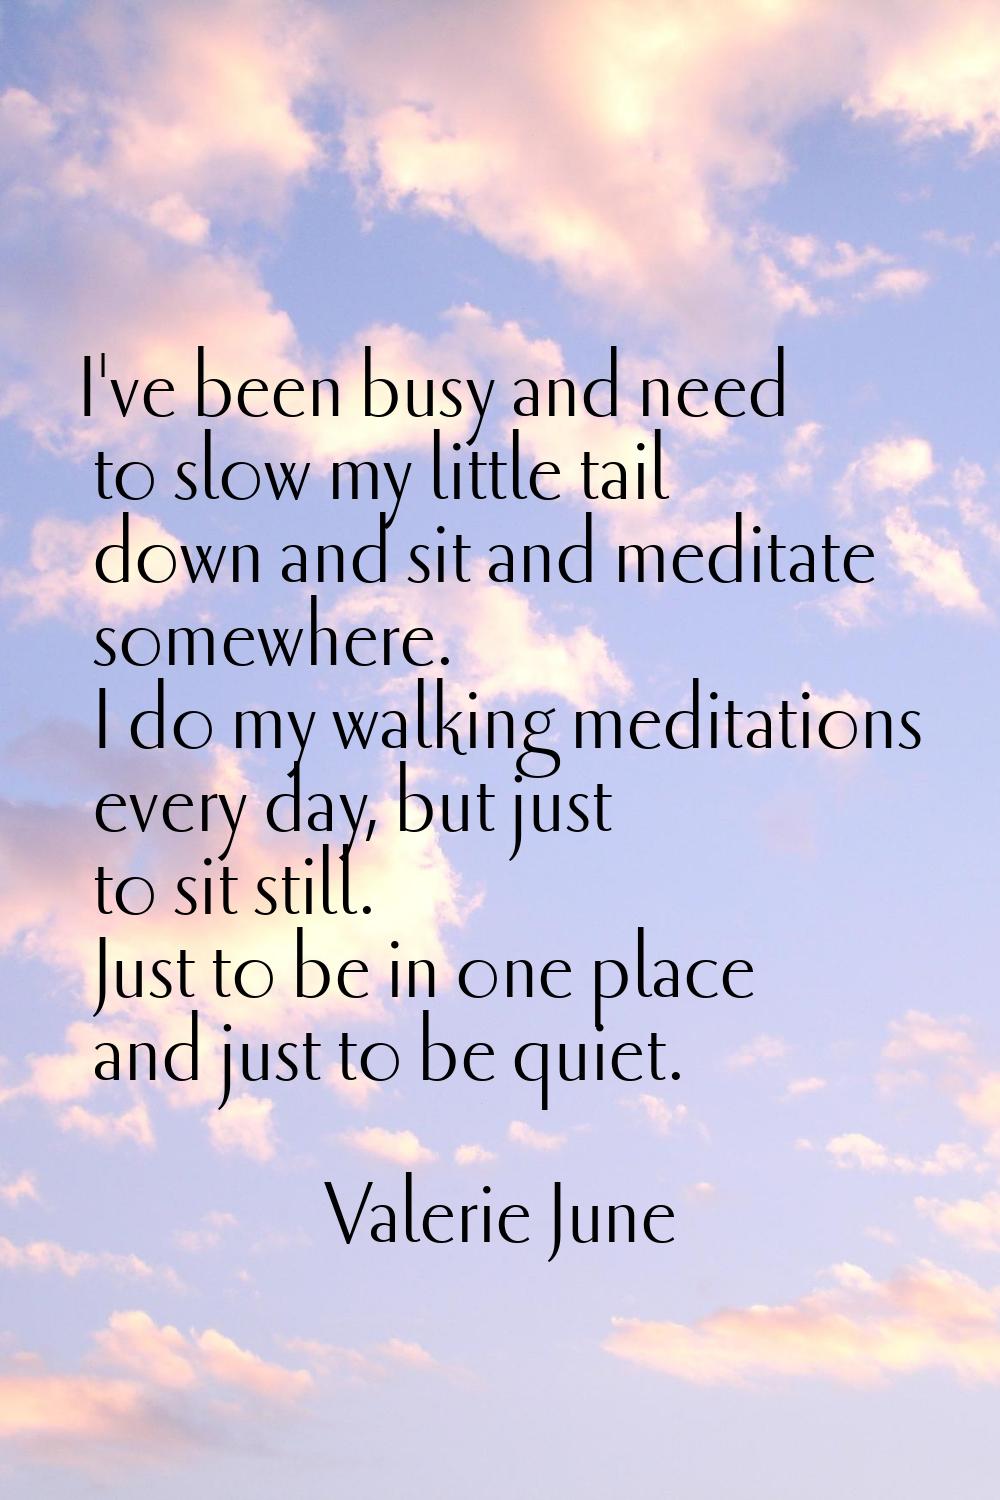 I've been busy and need to slow my little tail down and sit and meditate somewhere. I do my walking